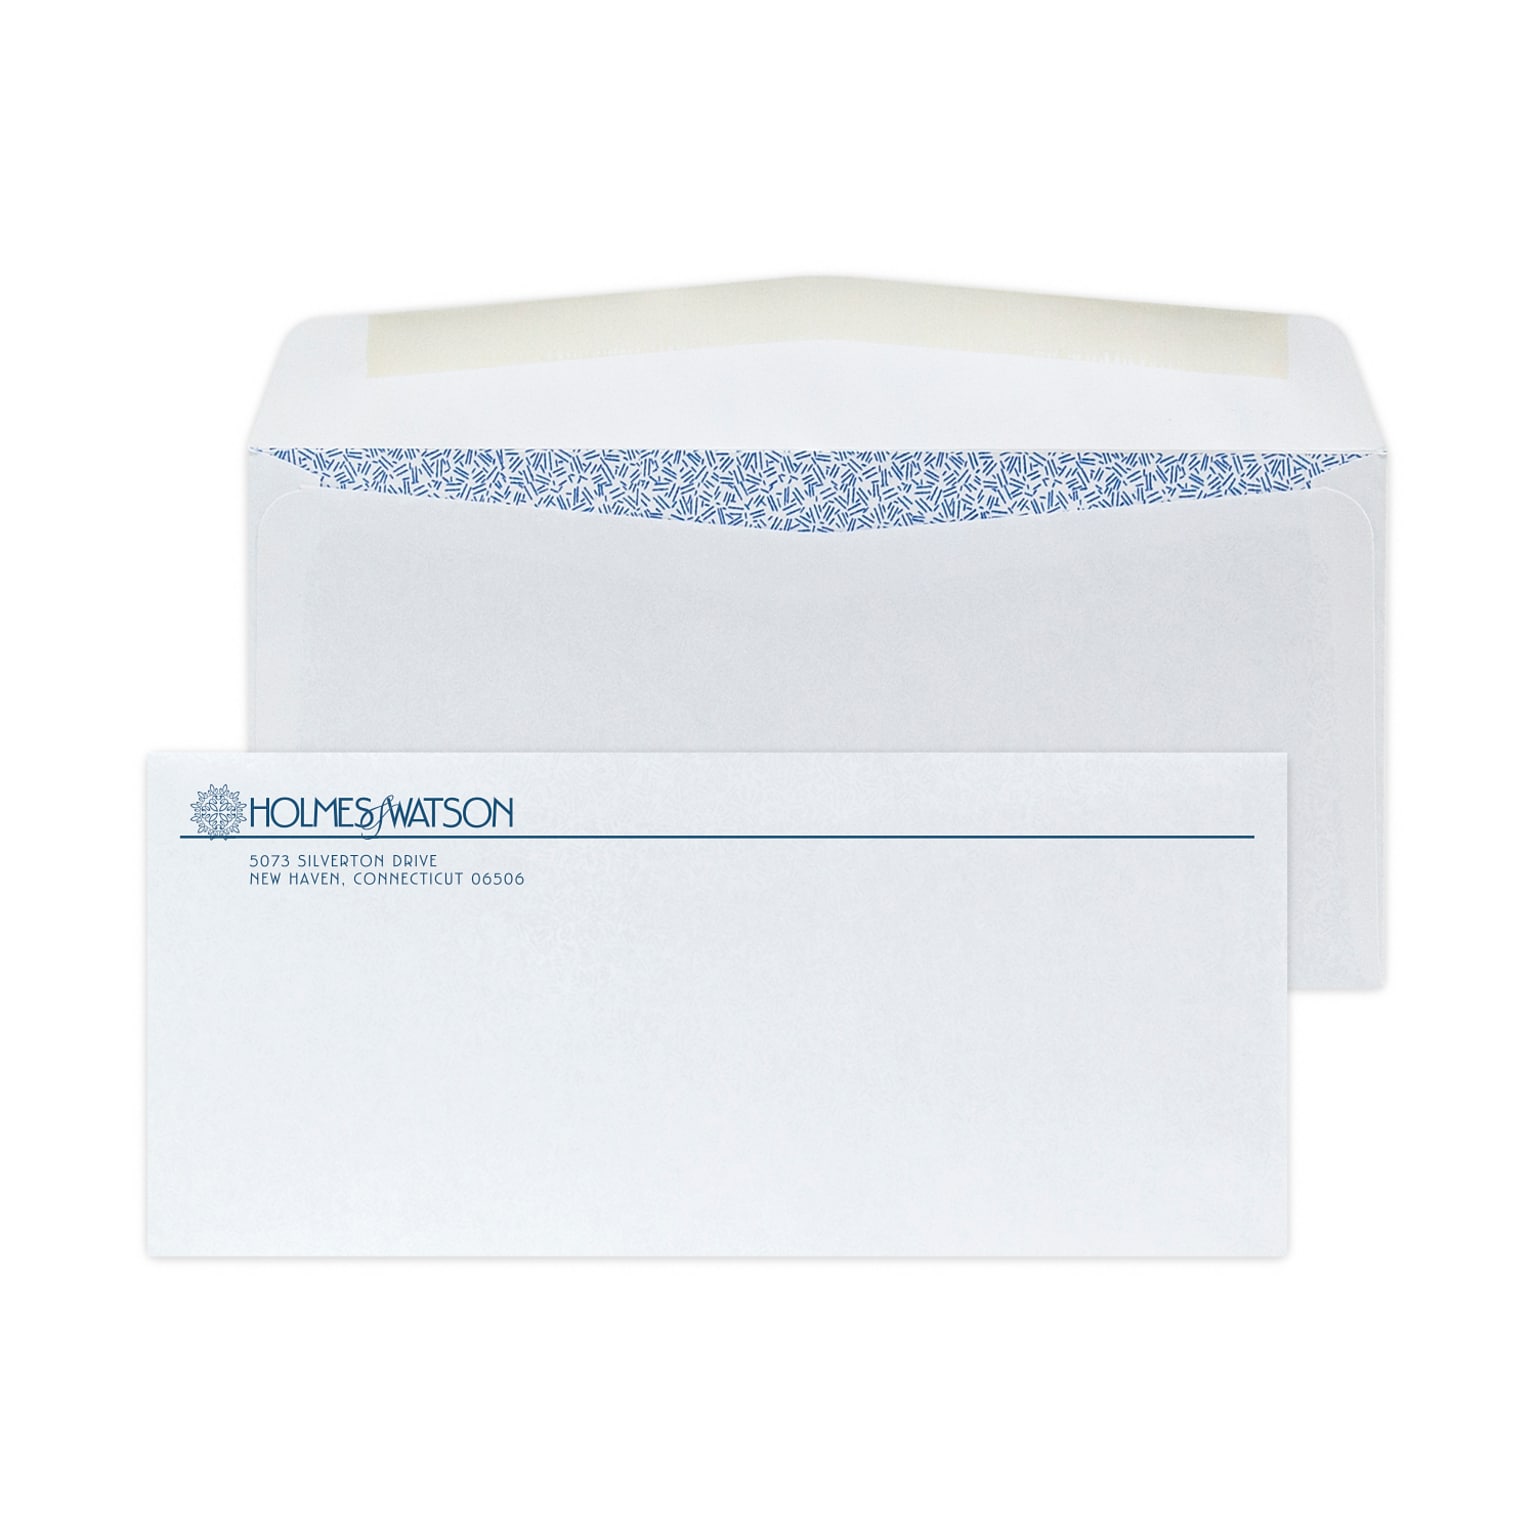 Custom #9 Standard Envelopes with Security Tint, 3 7/8 x 8 7/8, 24# White Wove, 1 Custom Ink, 250 / Pack